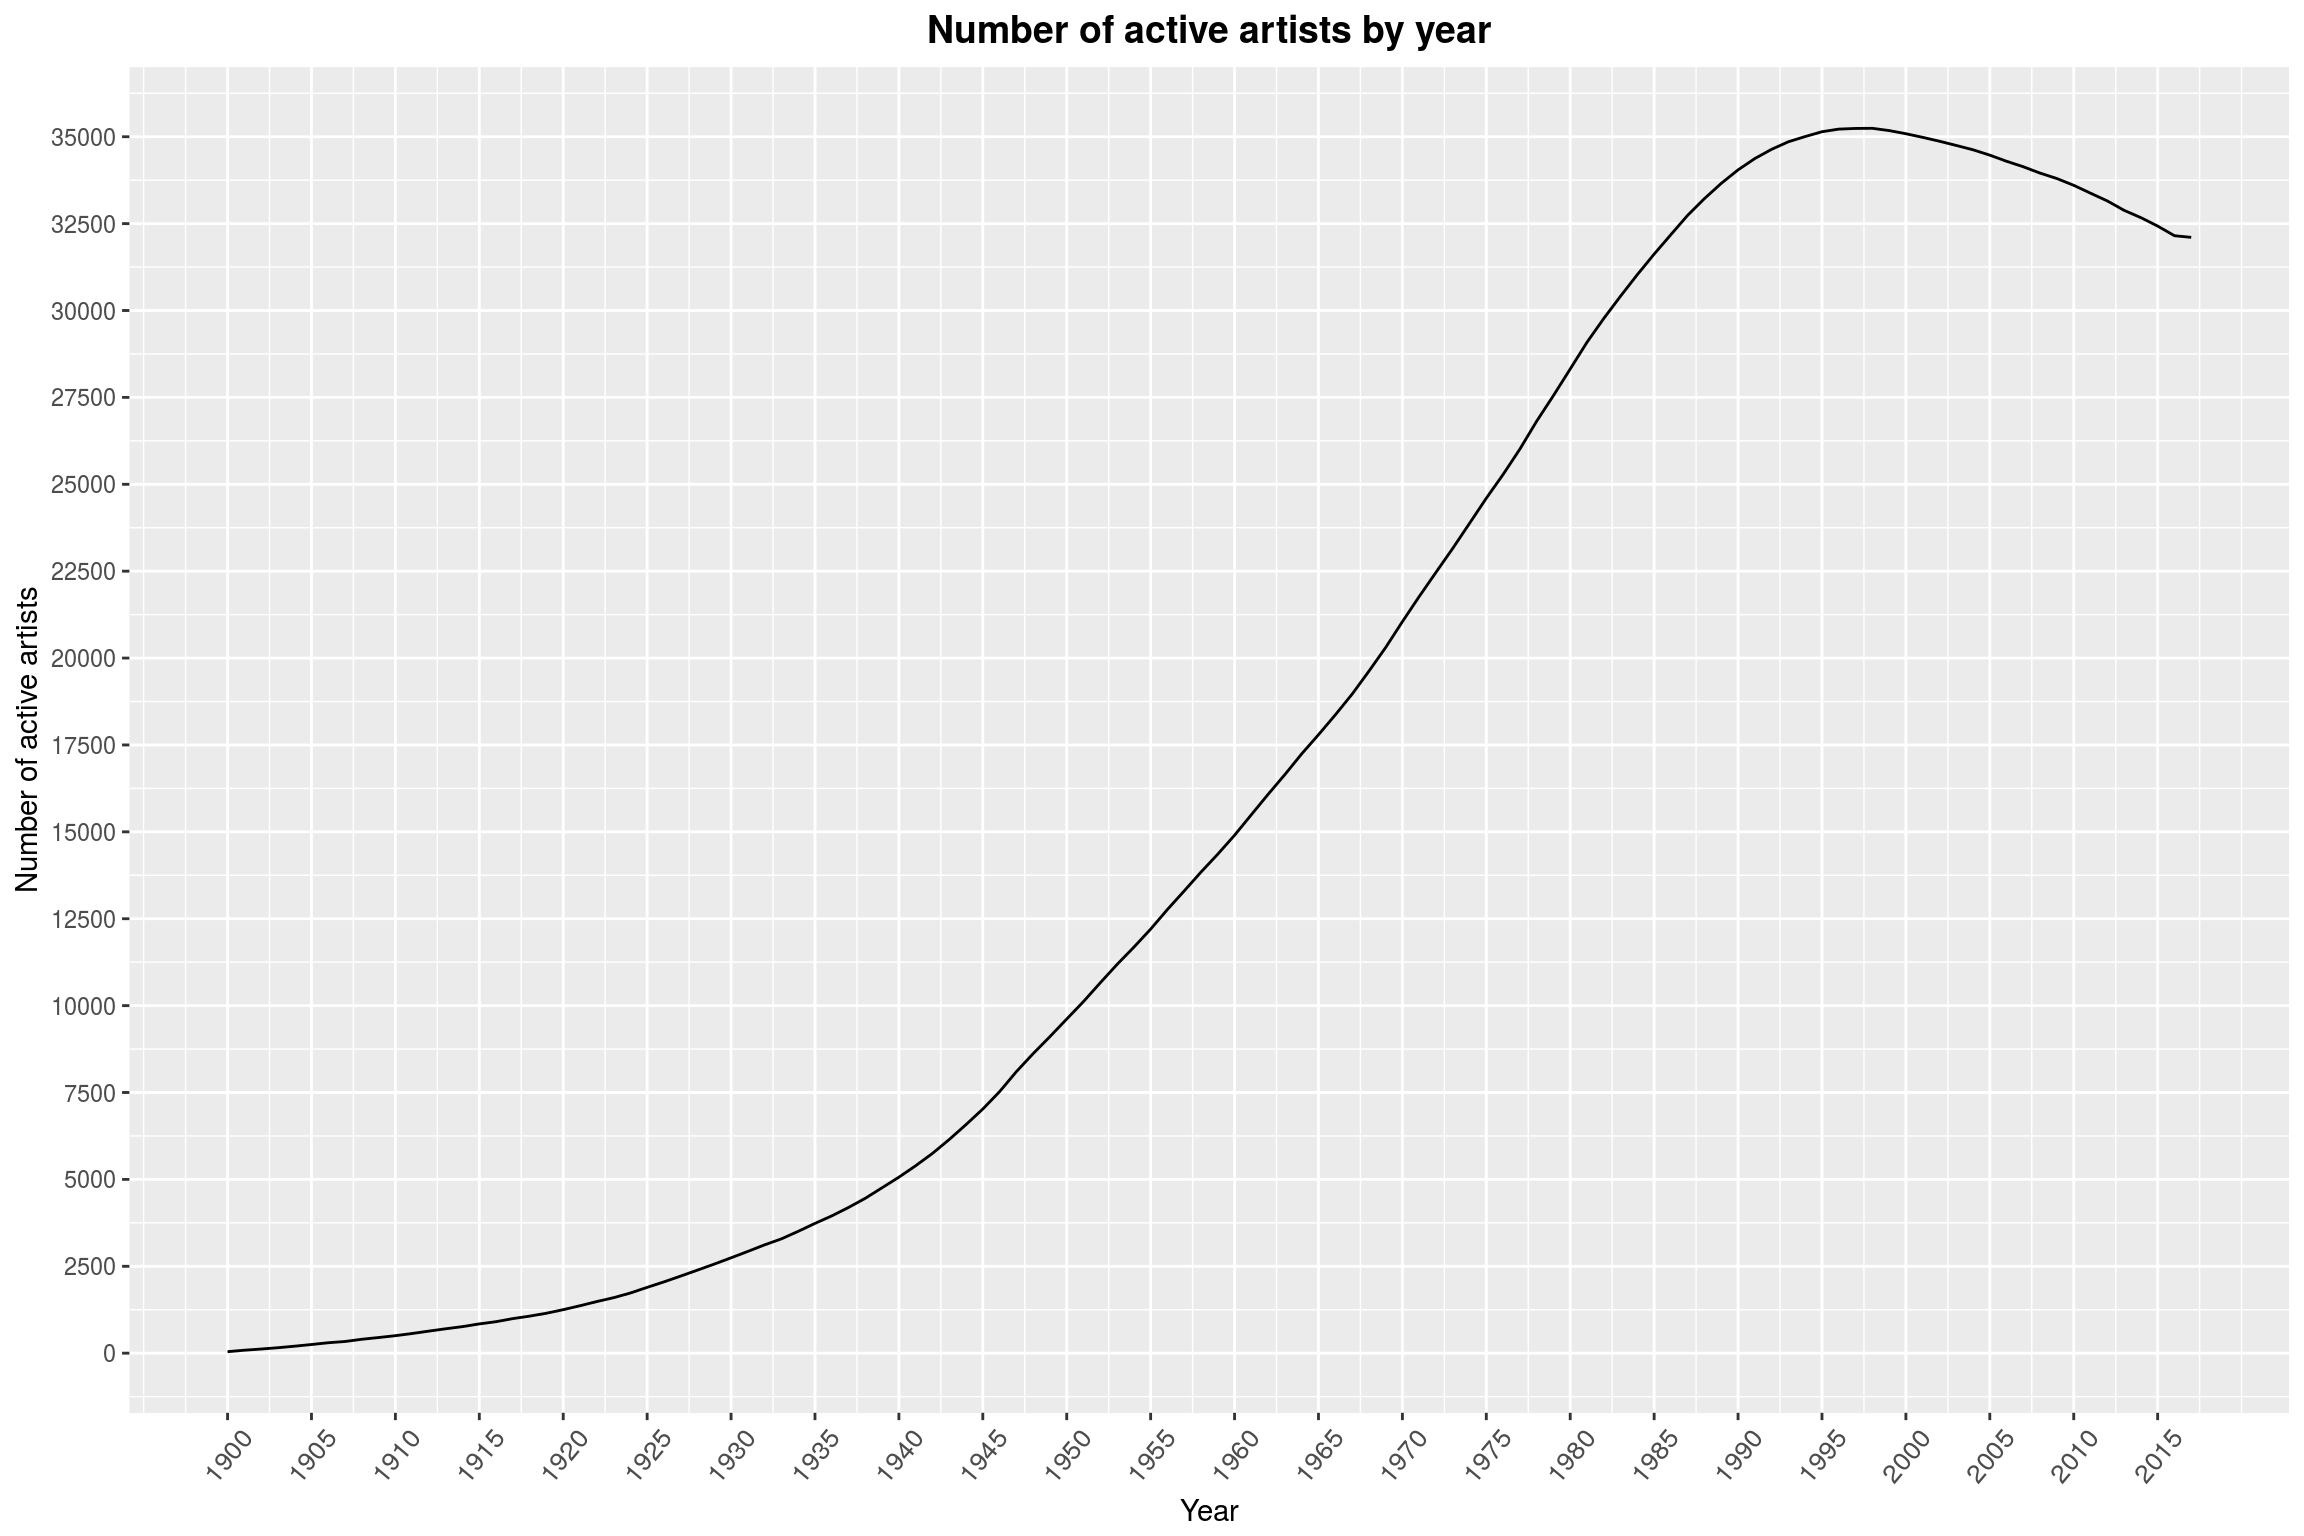 Number of active artists by year